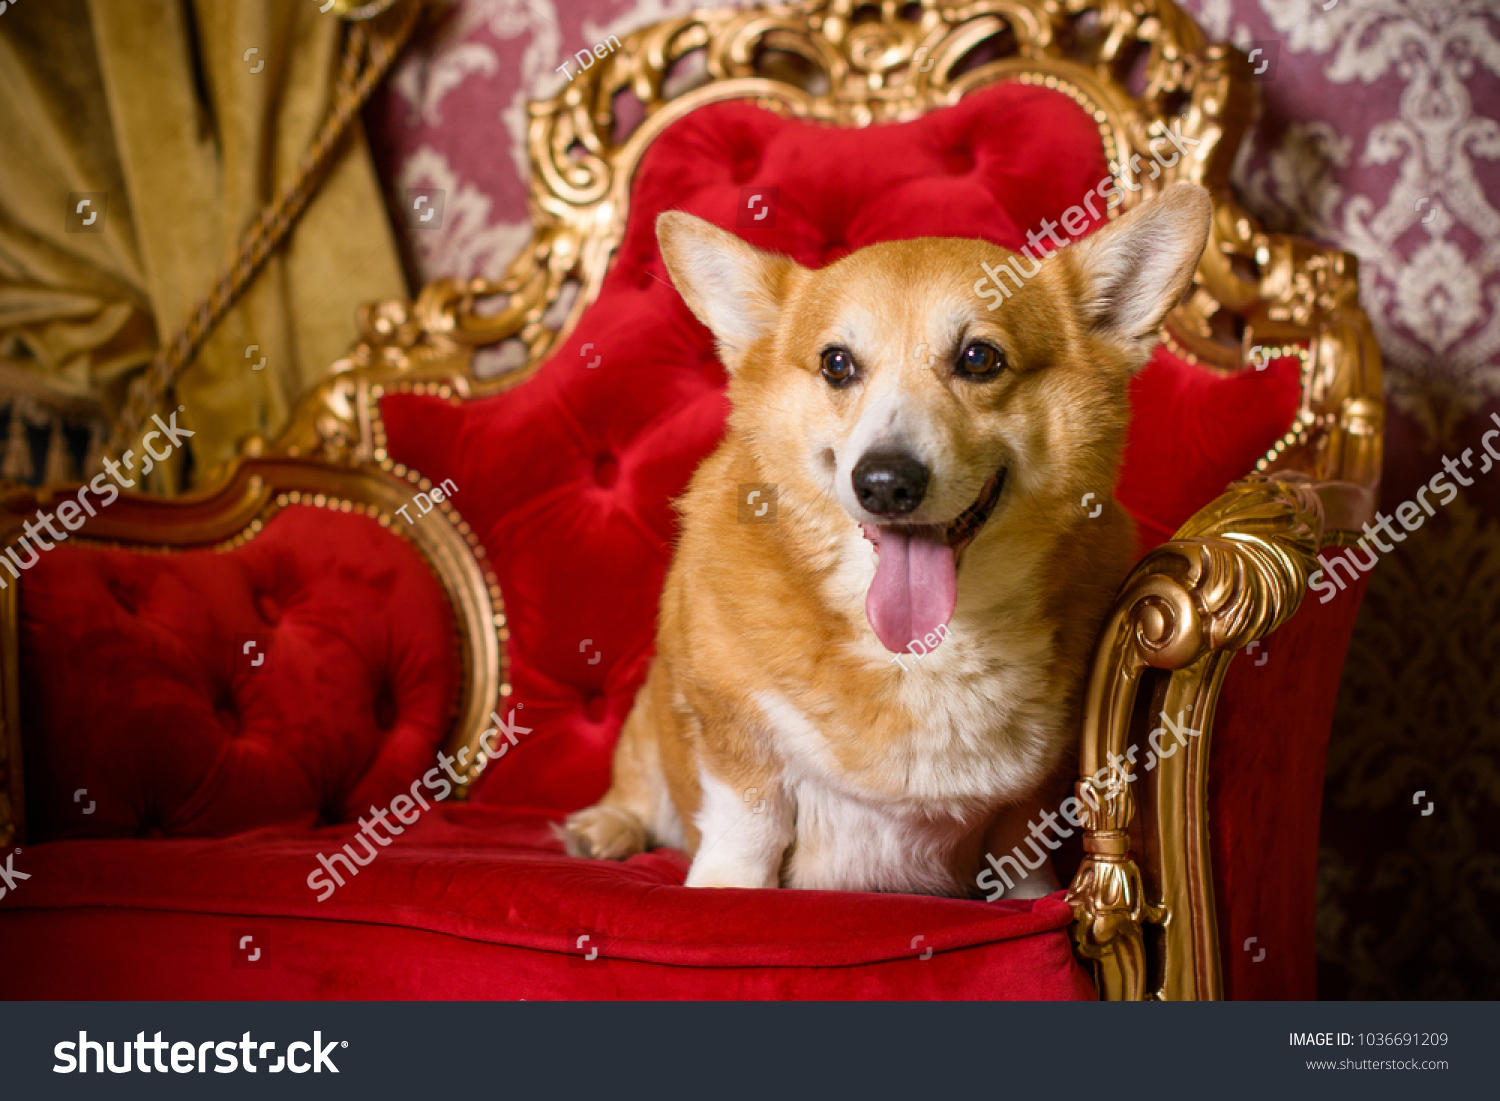 favorite dog breed of queen of england